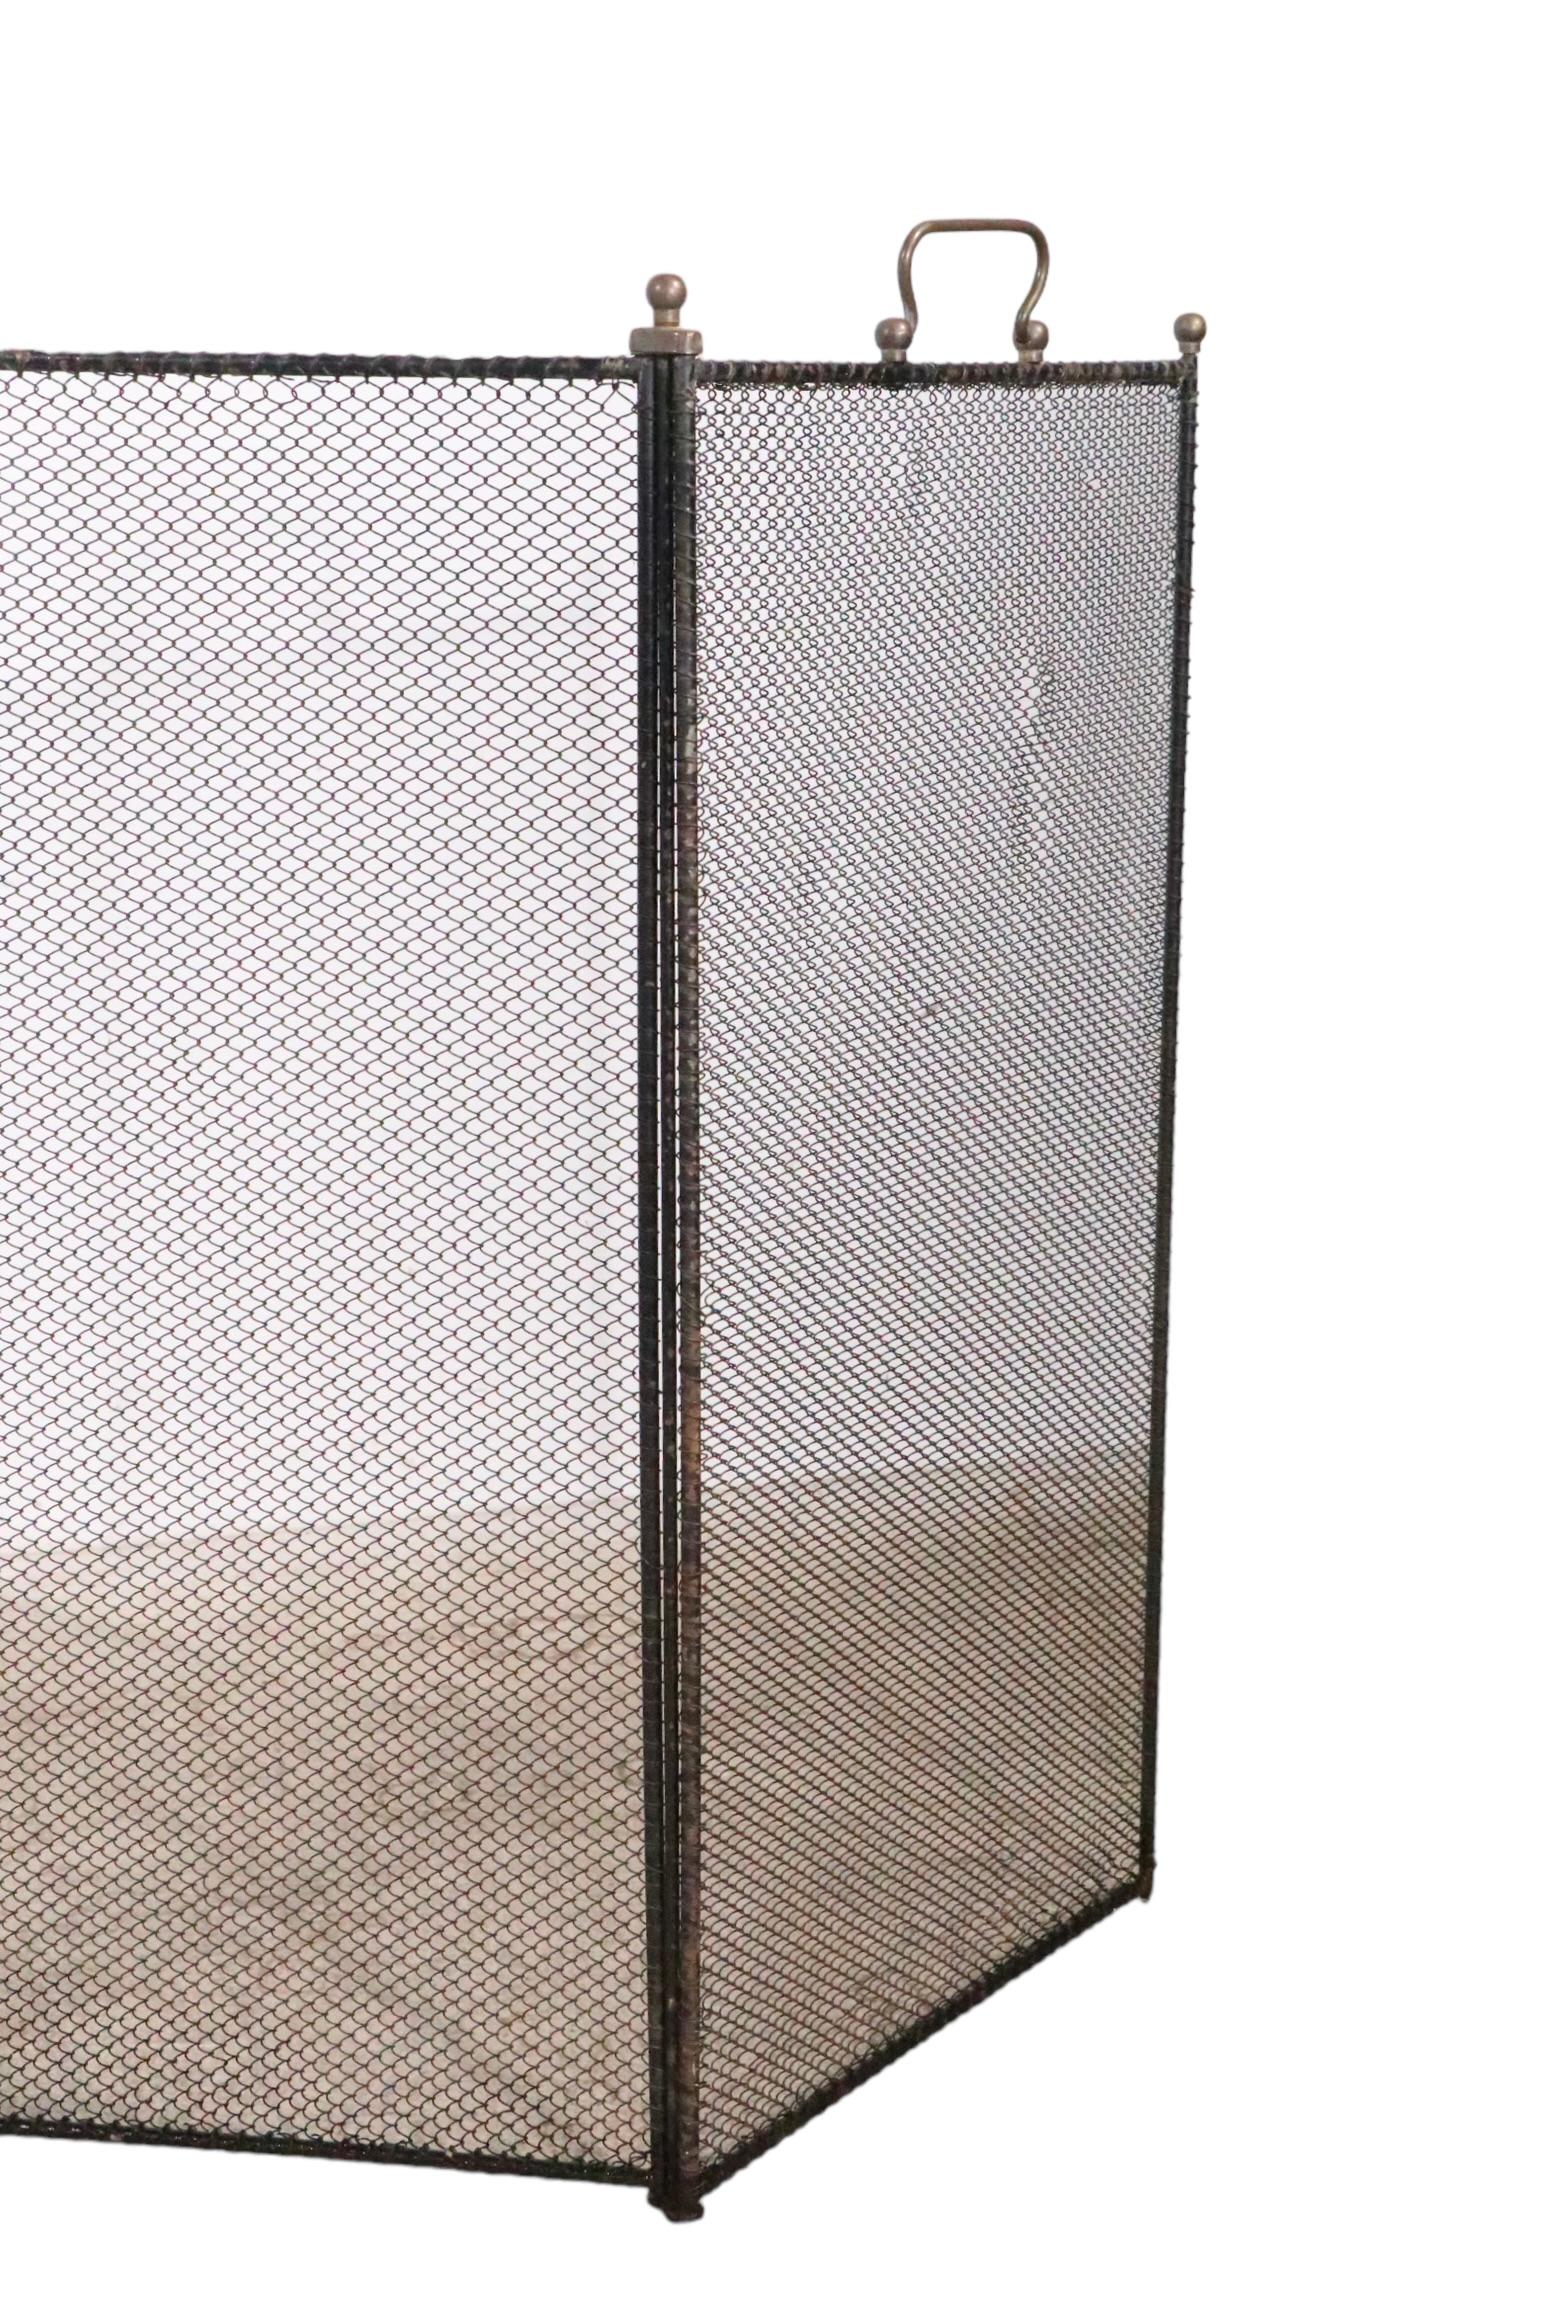 Antique Iron Brass and Mesh Four Panel Folding   Fireplace Screen  1